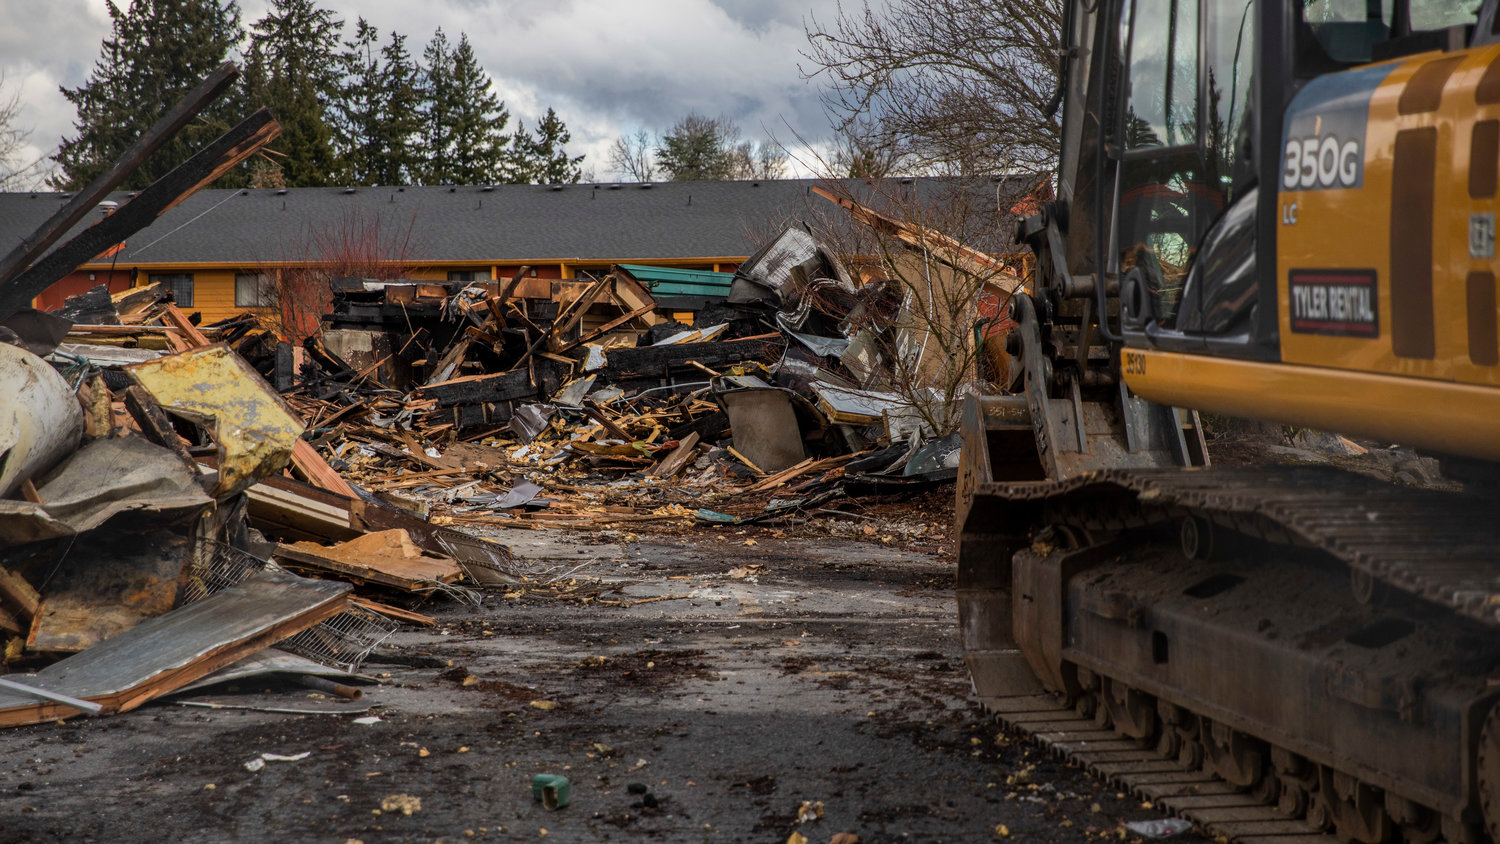 Charred debris remains at the former location of Papa Pete’s and Shari’s Cafe in Centralia on Tuesday after a fire consumed the structure.